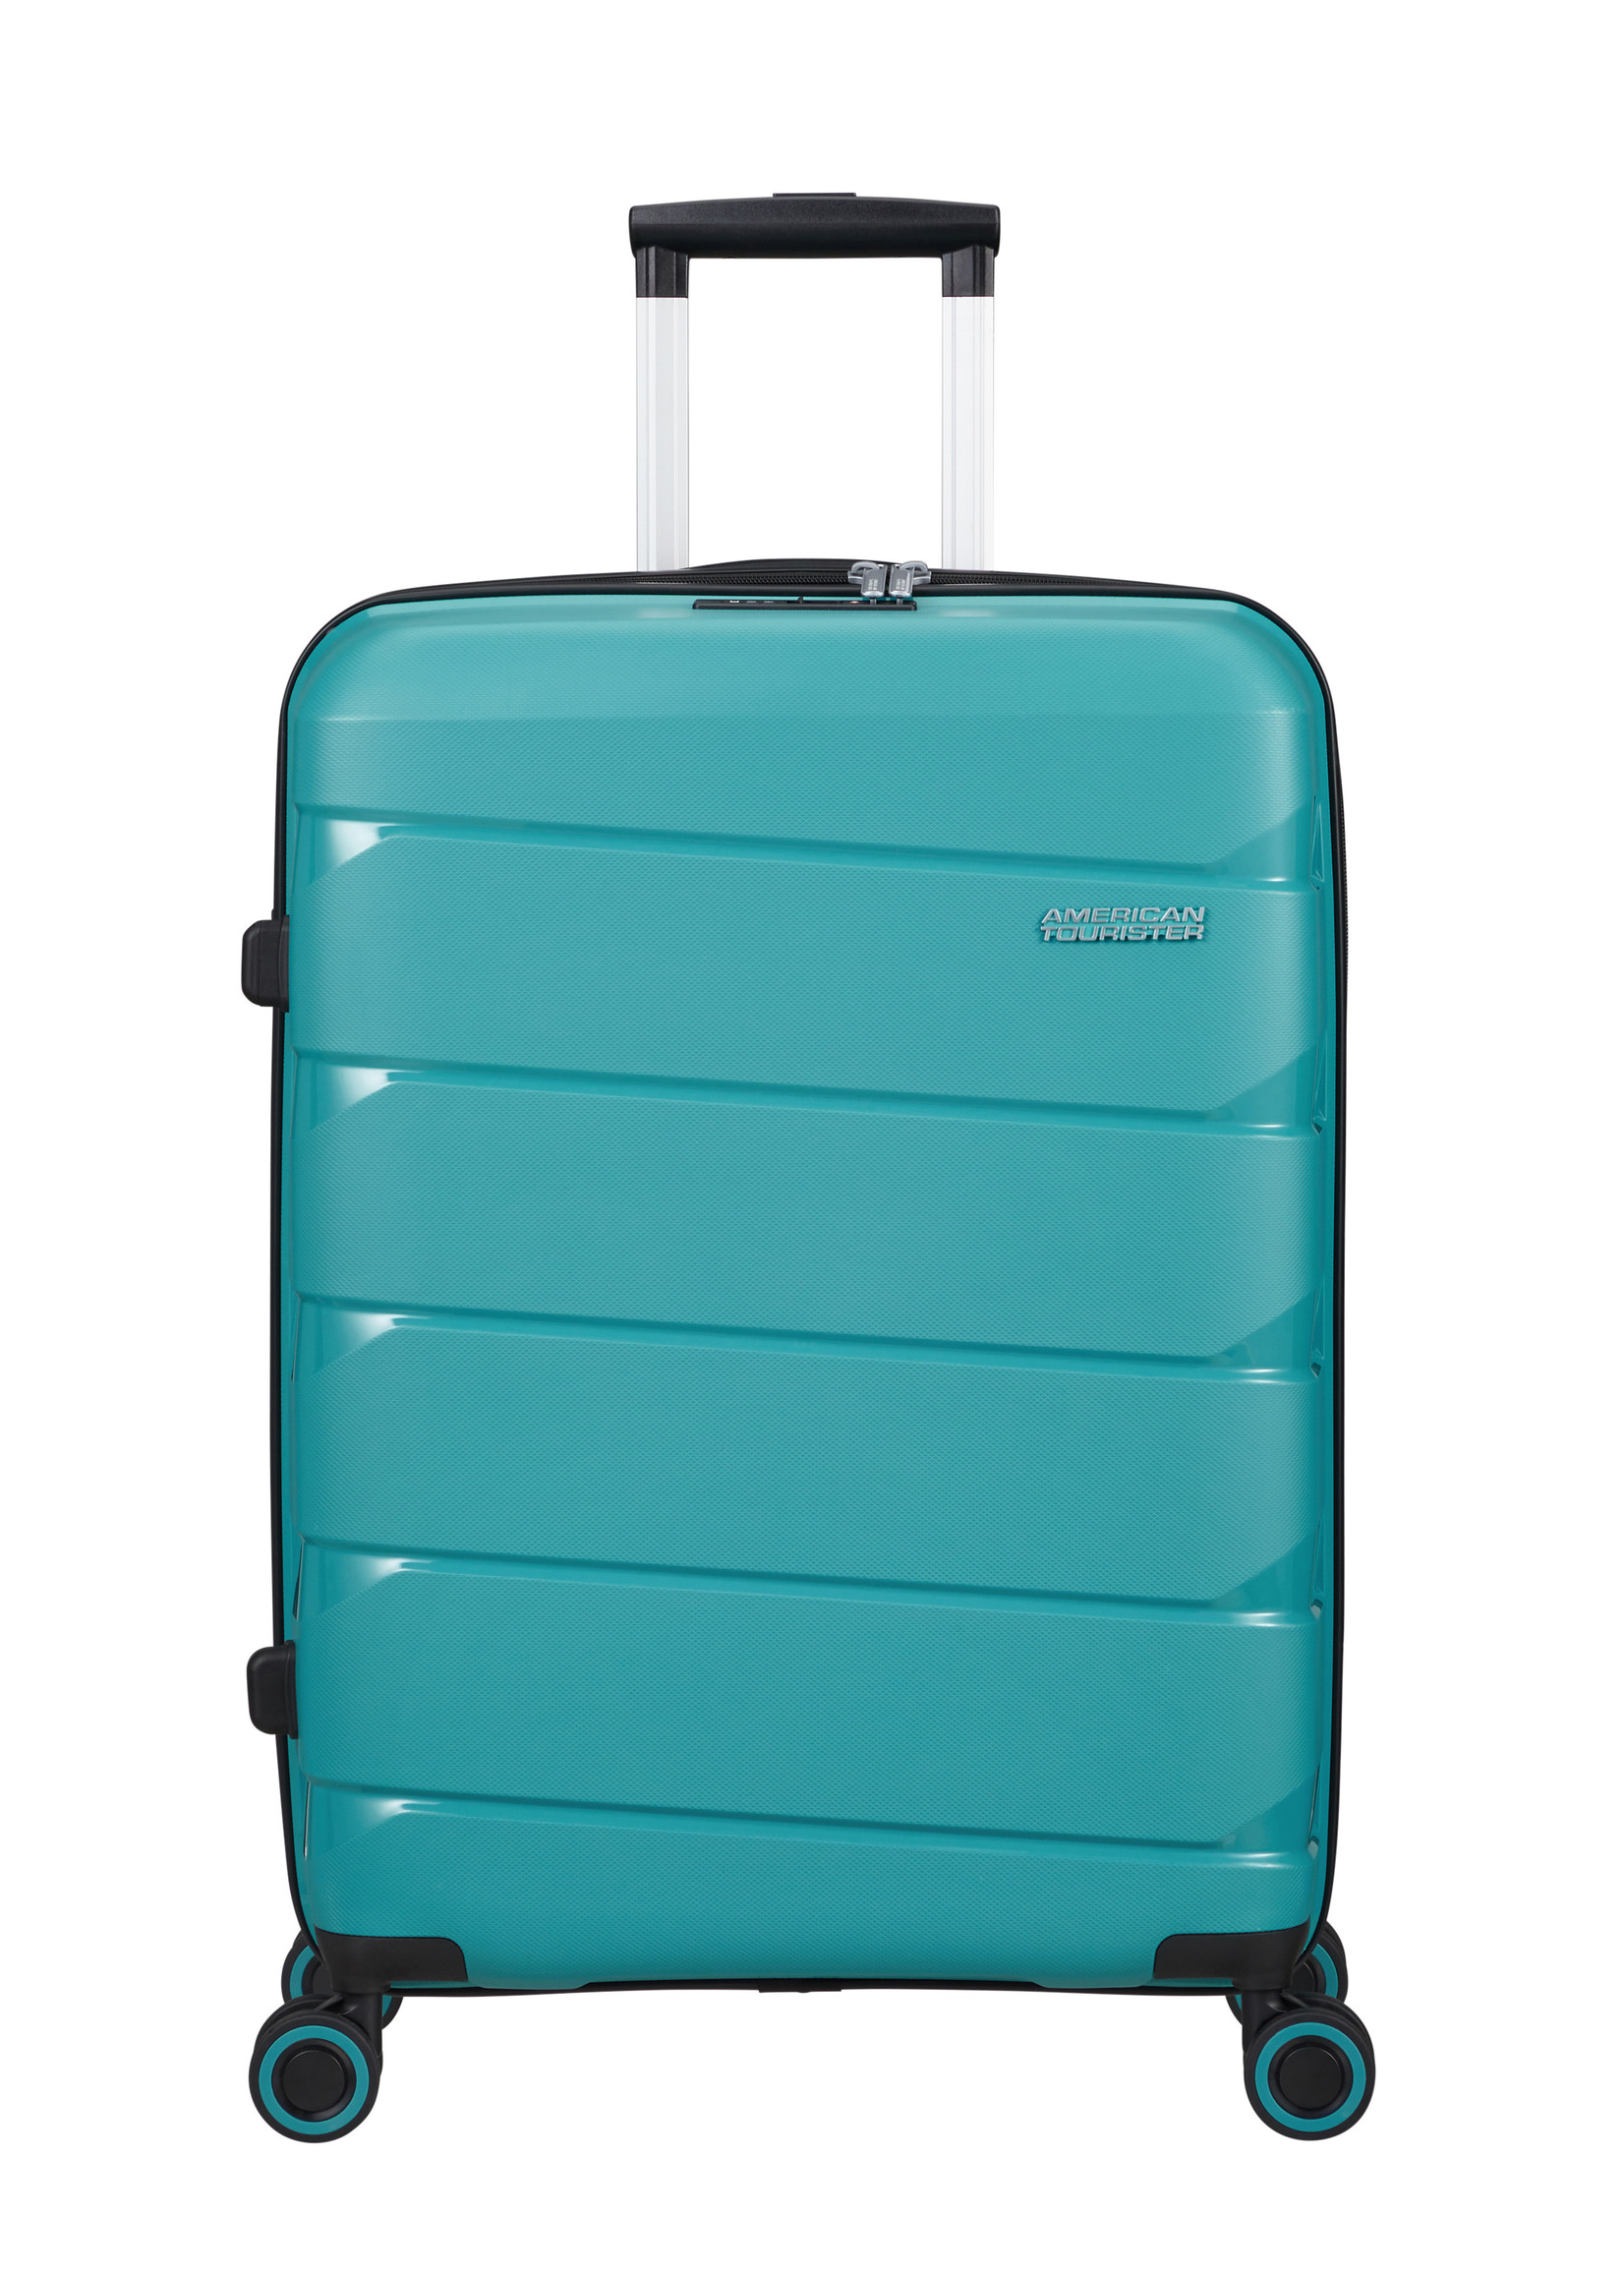 AMERICAN TOURISTER AIR MOVE SPINNER 66 TEAL